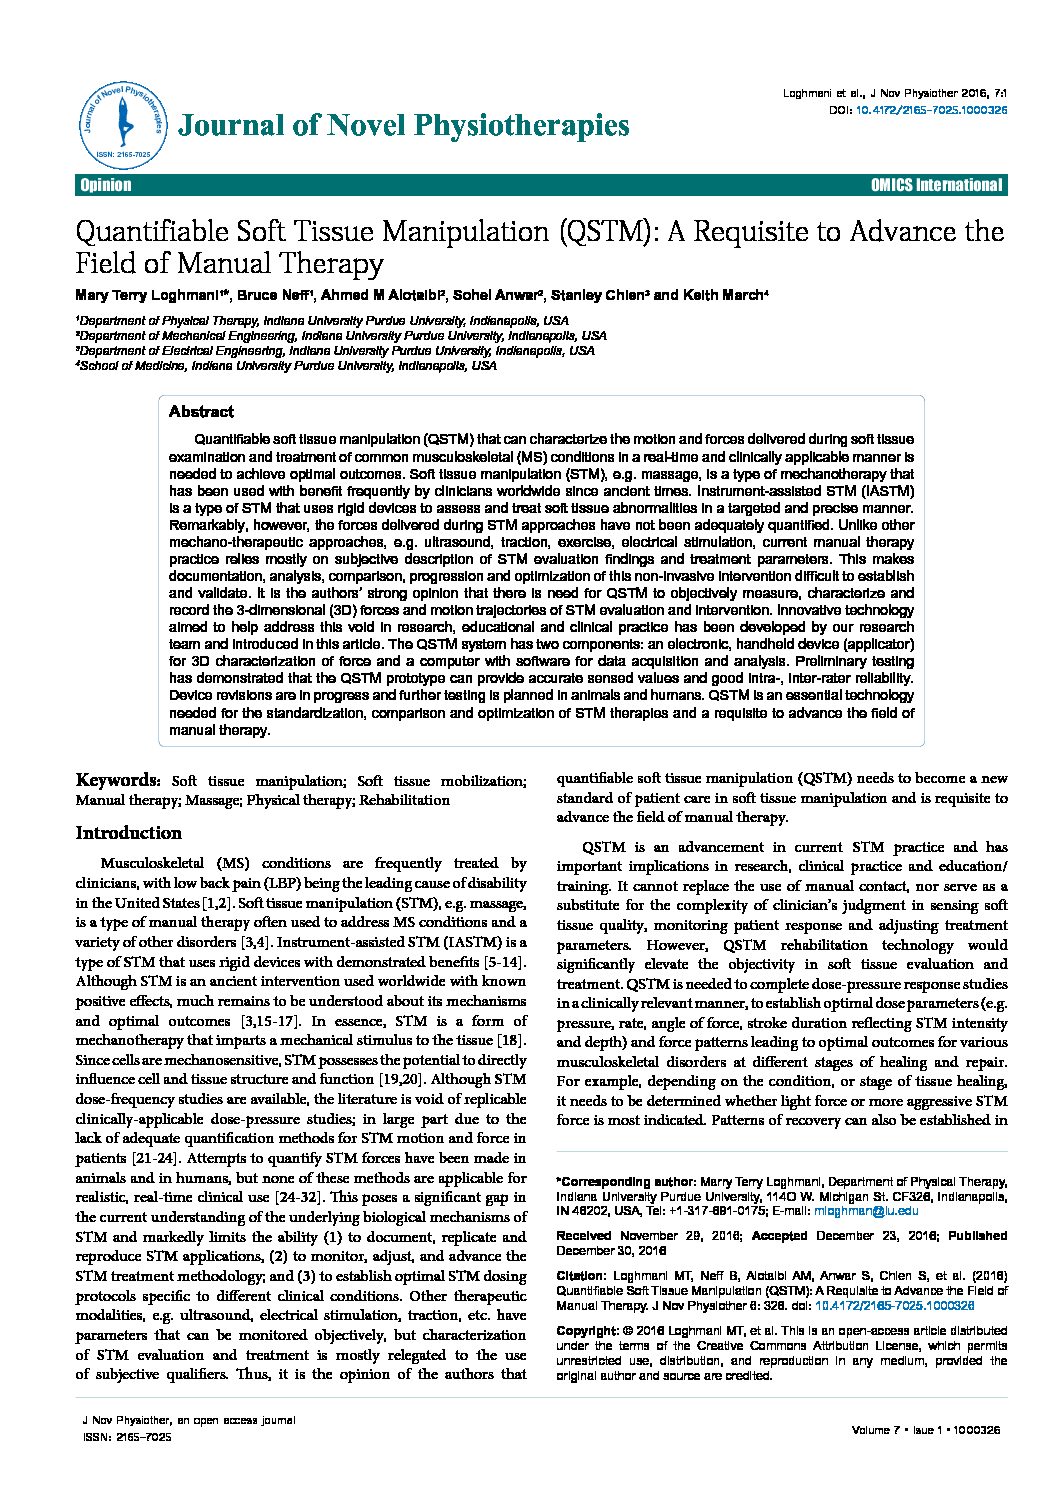 Quantifiable Soft Tissue Manipulation (QSTM): A Requisite to Advance the Field of Manual Therapy